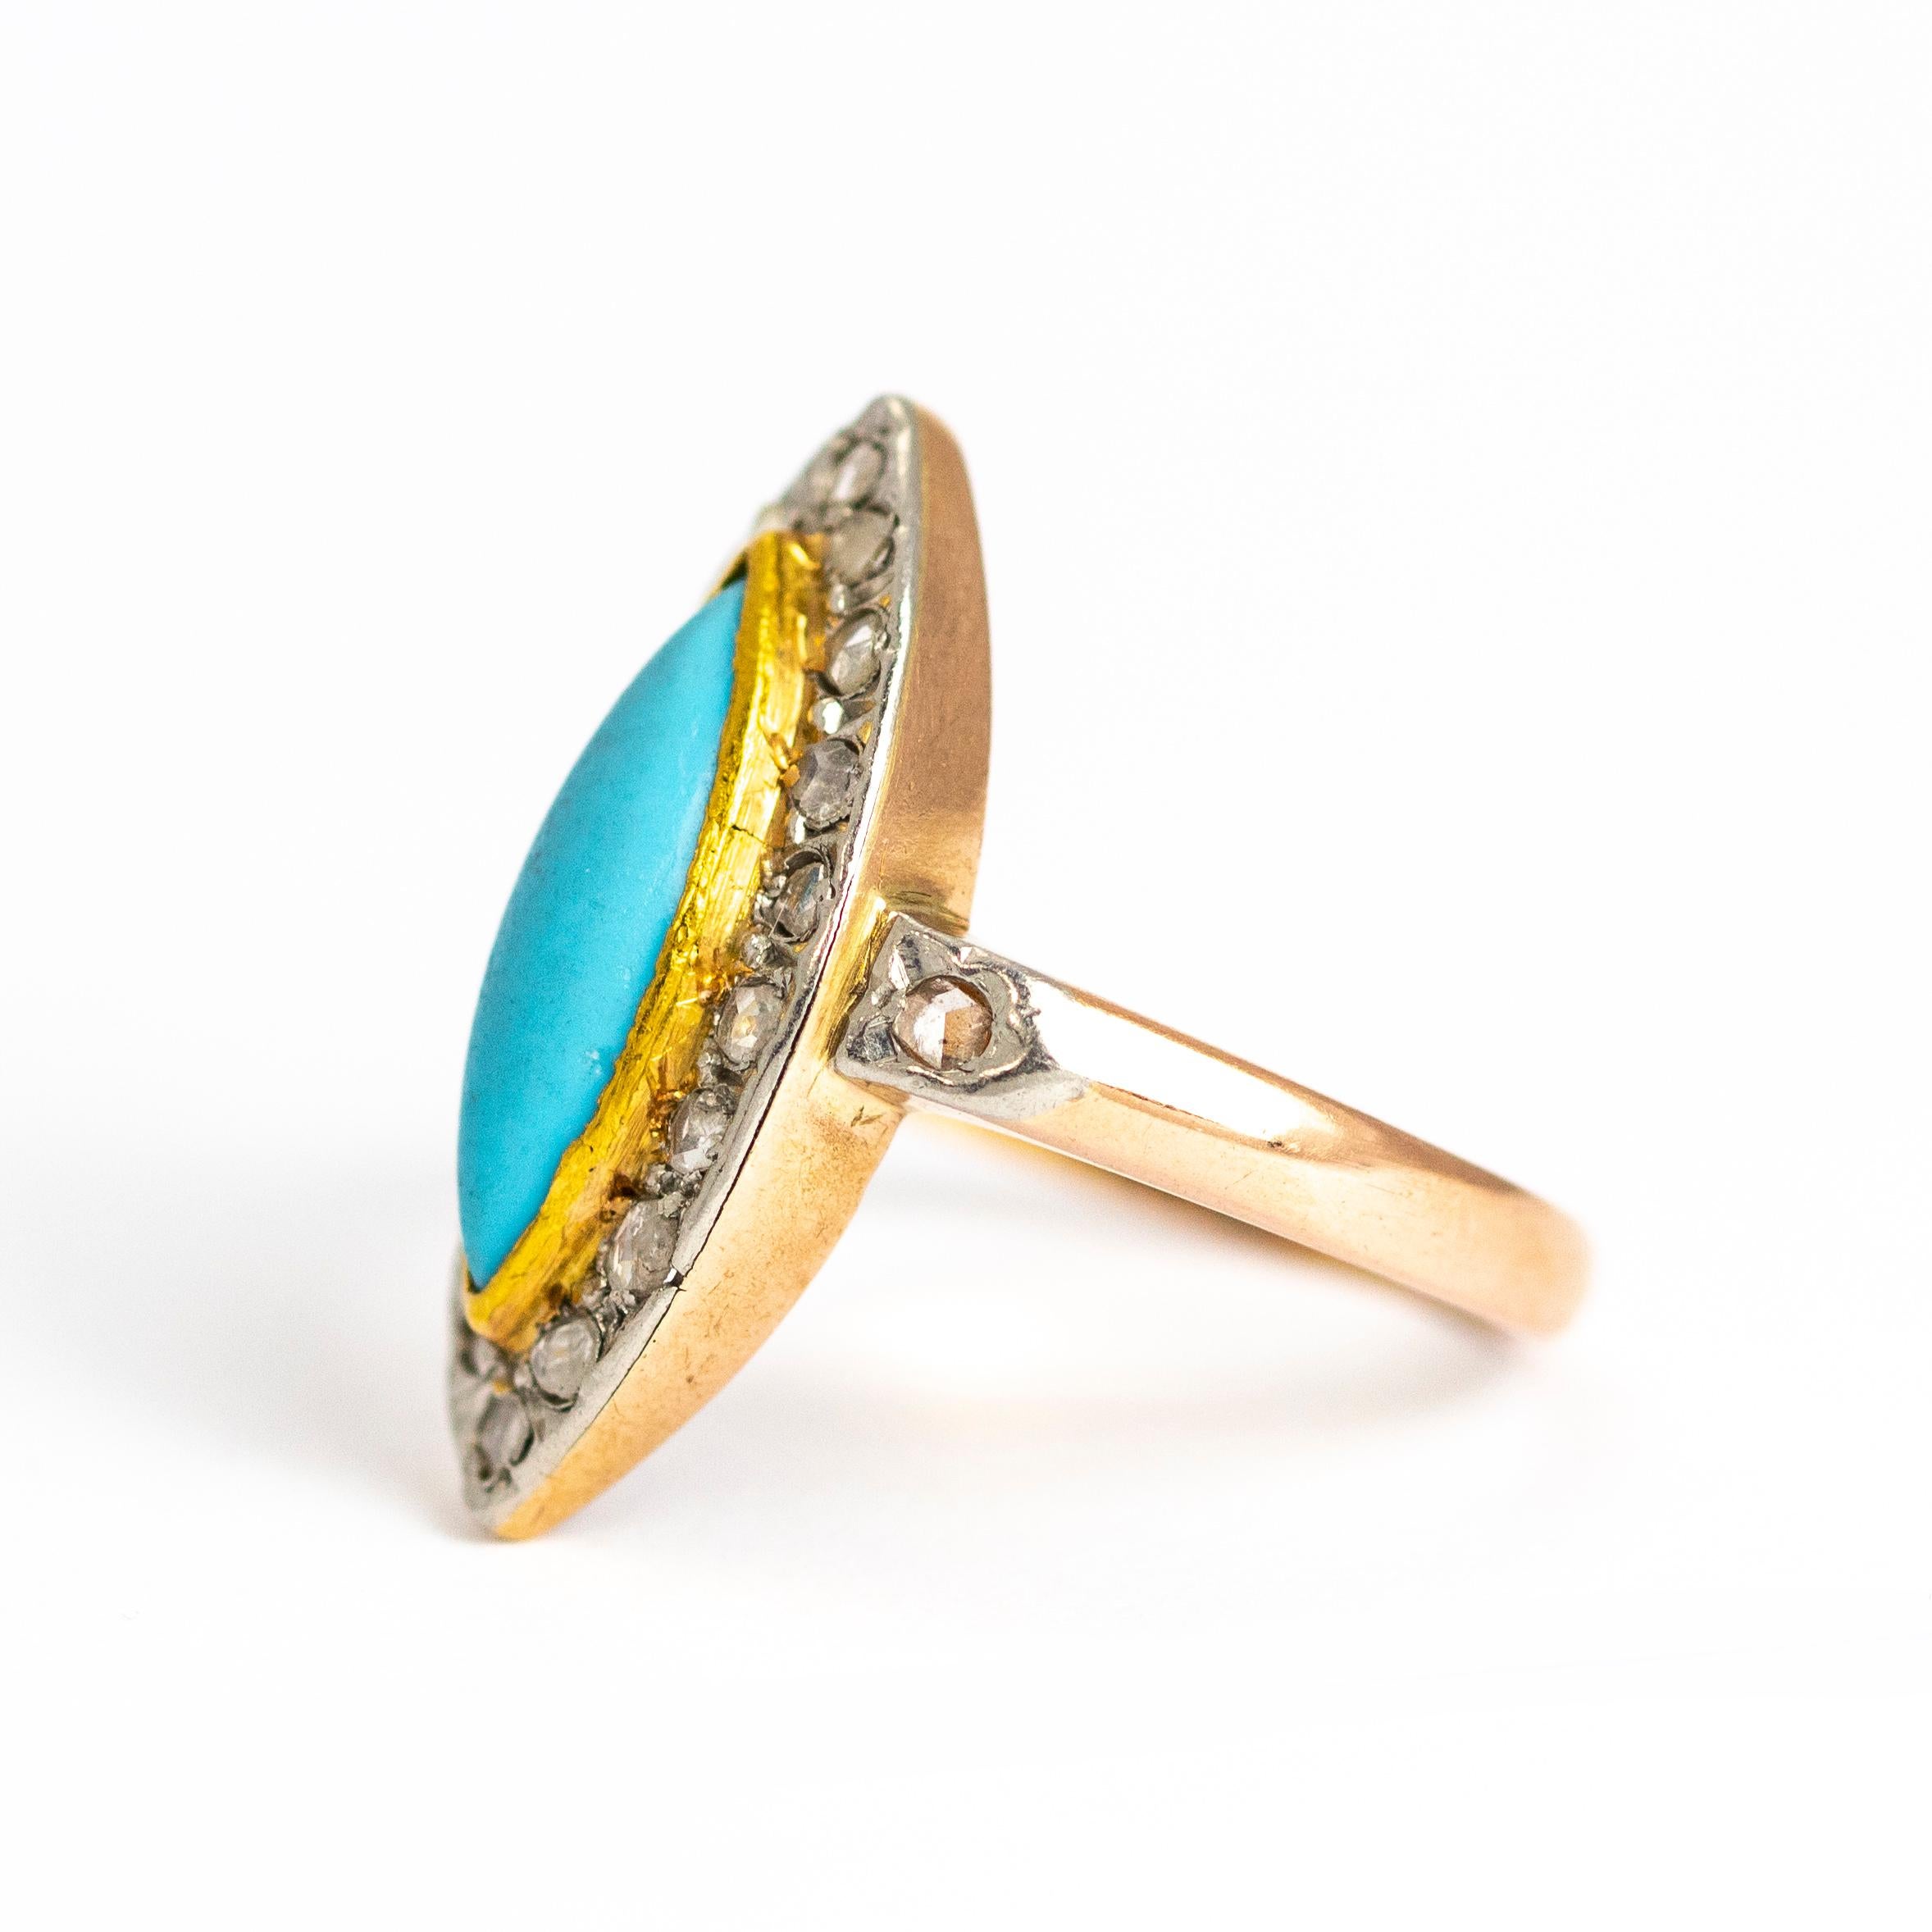 Absolutely charming antique turquoise navette cluster ring featuring sparkling rose cut diamonds. The turquoise is set in yellow gold which really helps the colour to pop and the rose cut diamonds are set in platinum.

Ring Size: L 1/2 or 6